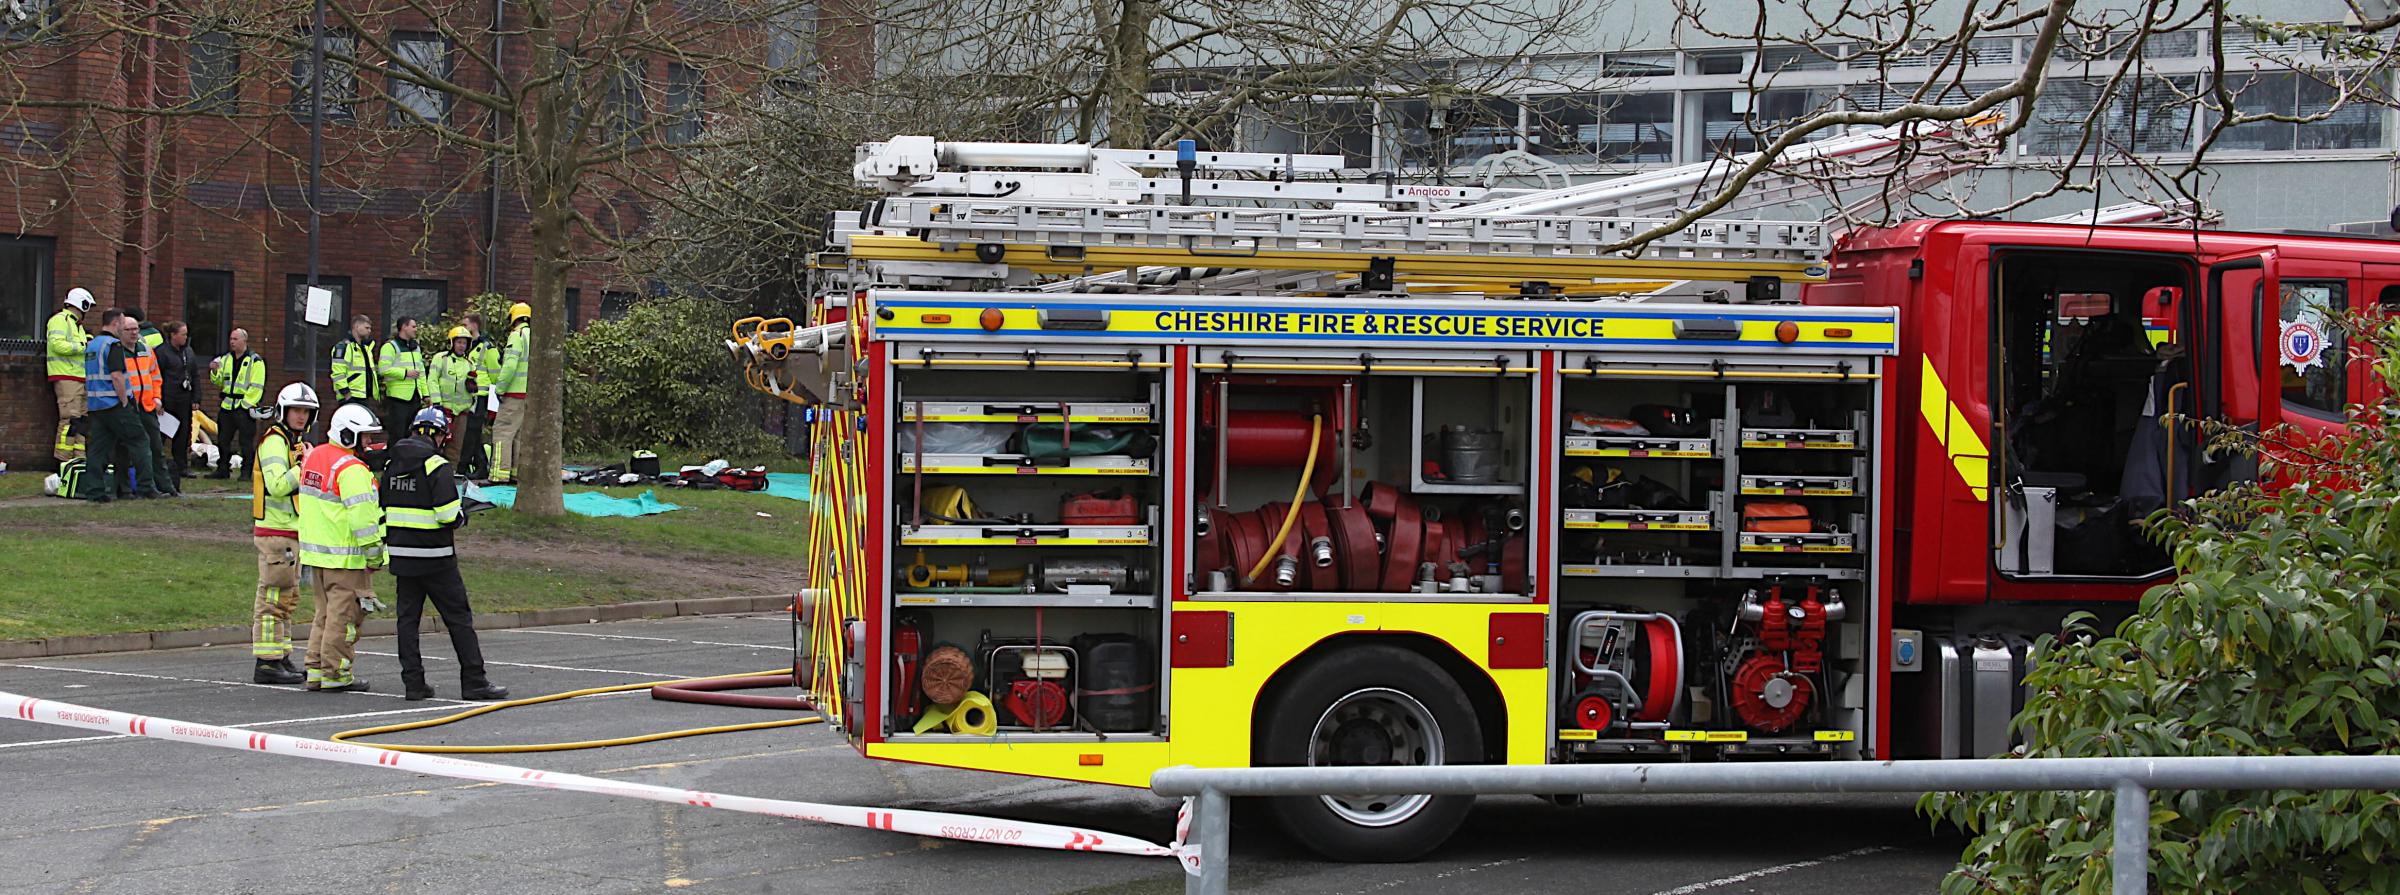 Several fire appliances were deployed for the emergency exercise. Picture: Tom Ormiston.